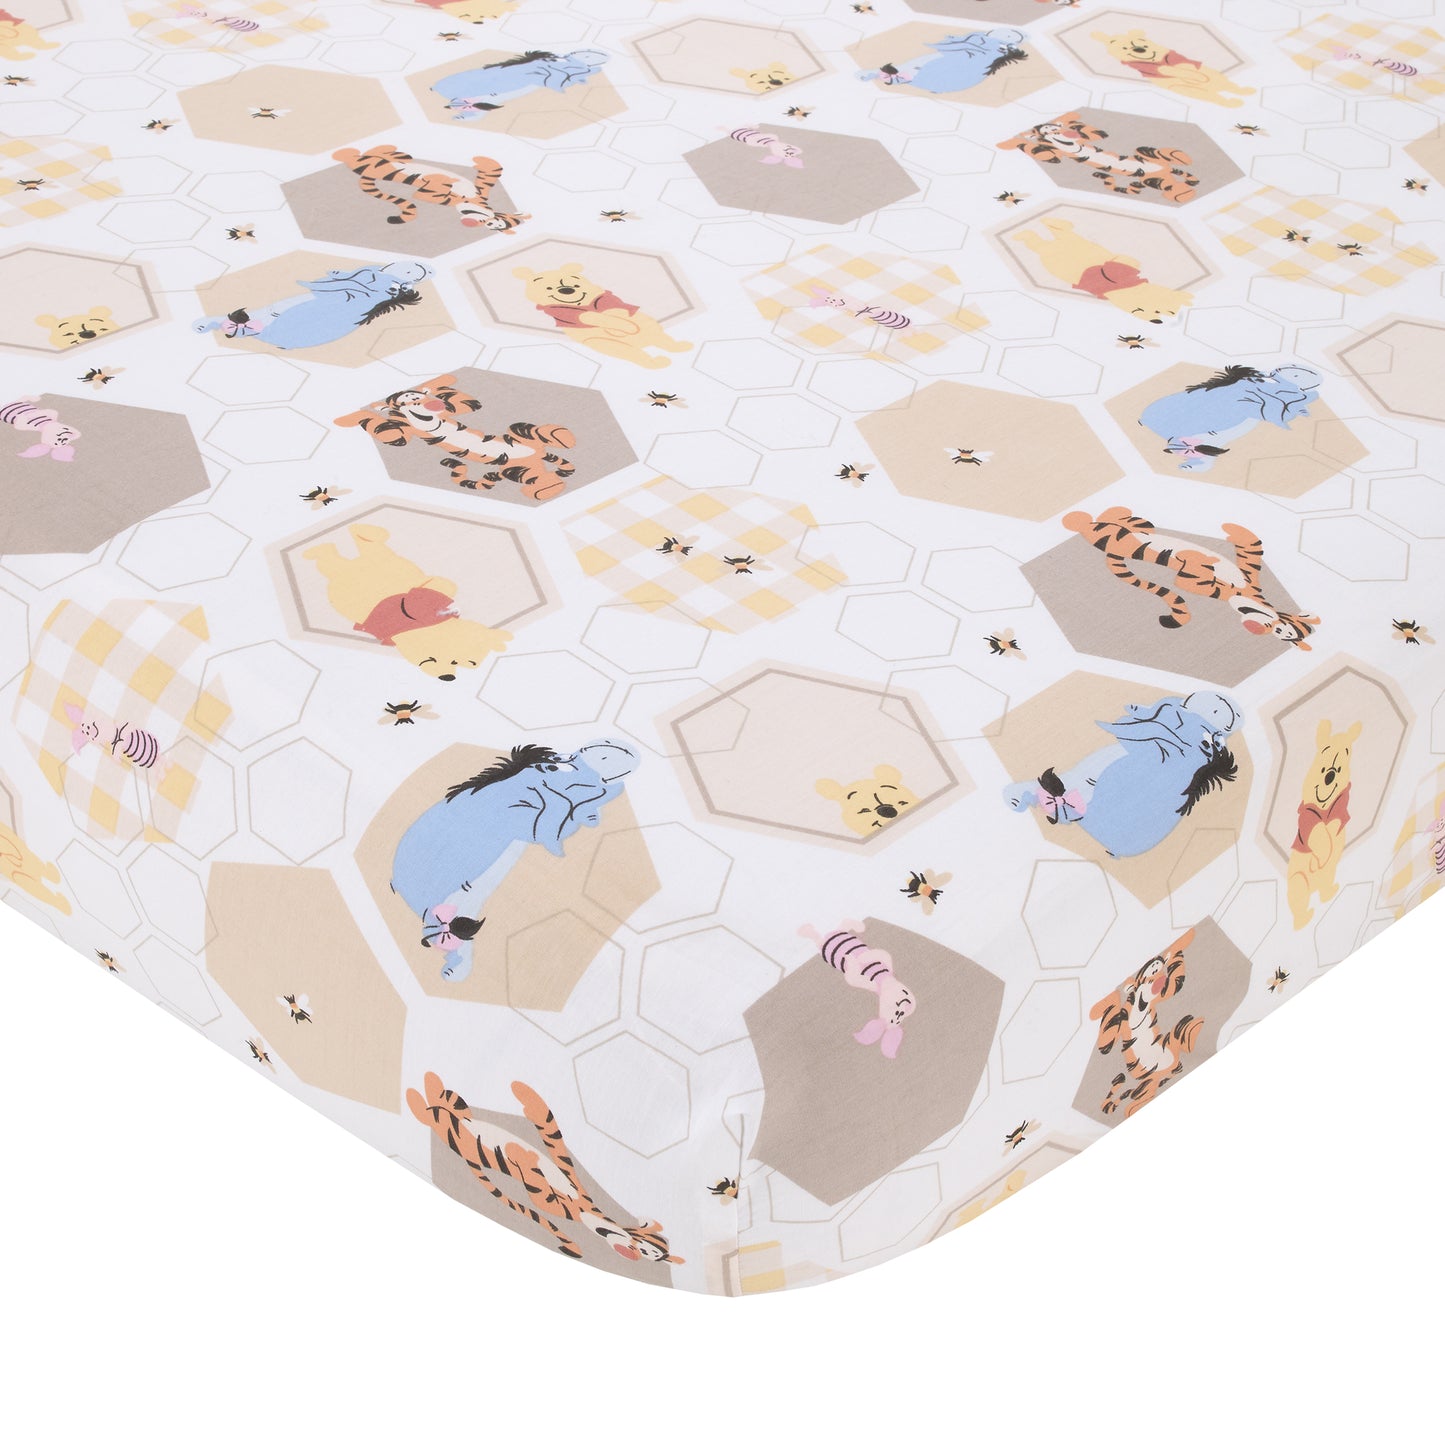 Disney Winnie the Pooh Hugs and Honeycombs Grey, White, and Tan Patchwork with Piglet, Tigger and Eeyore 3 Piece Crib Bedding Set - Comforter, 100% Cotton Fitted Crib Sheet, and Crib Skirt